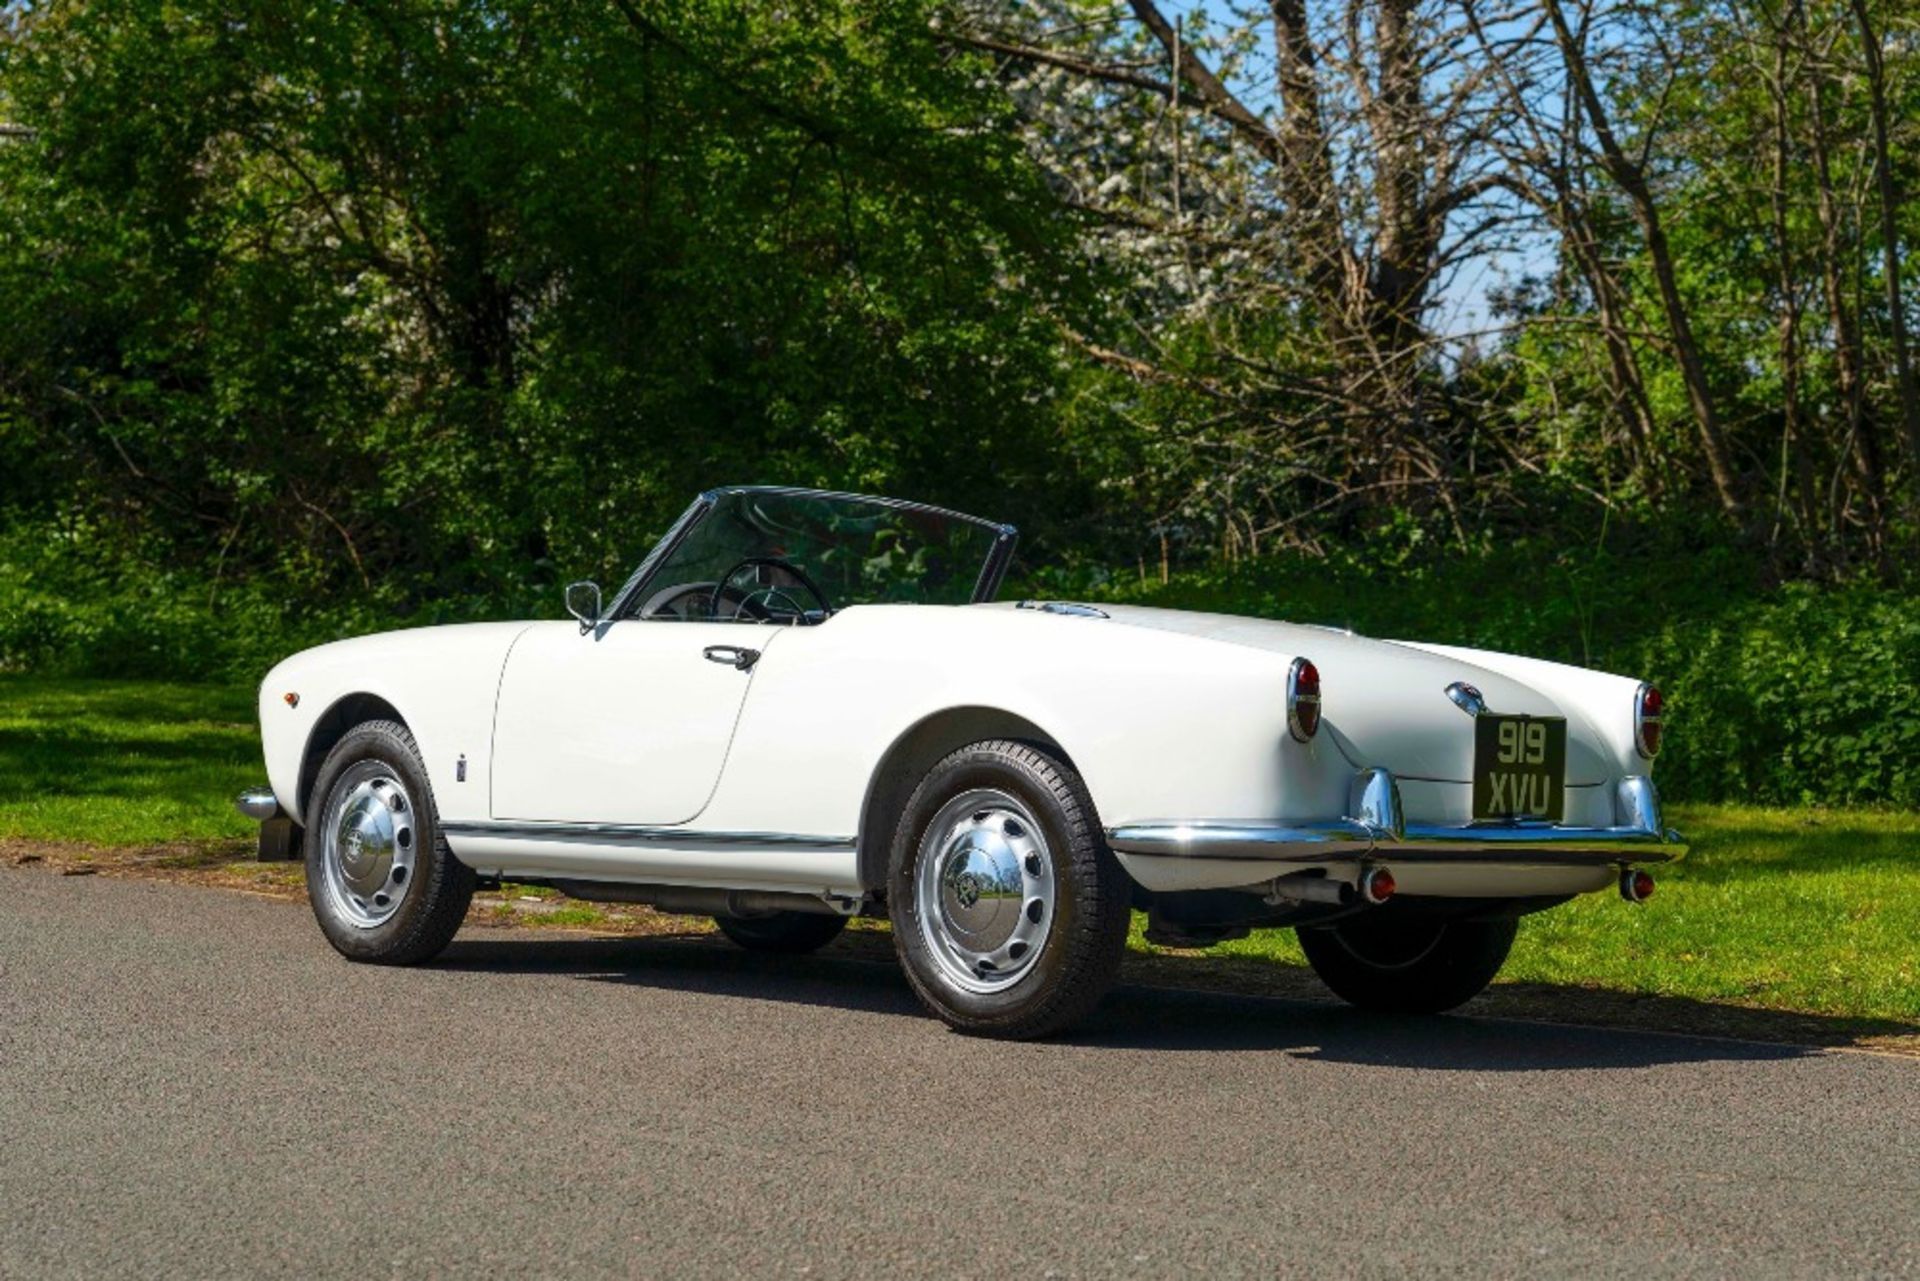 1958 ALFA-ROMEO GIULIETTA SPIDER Registration Number: 919 XVU            Chassis Number: AR 1495 - Image 5 of 23